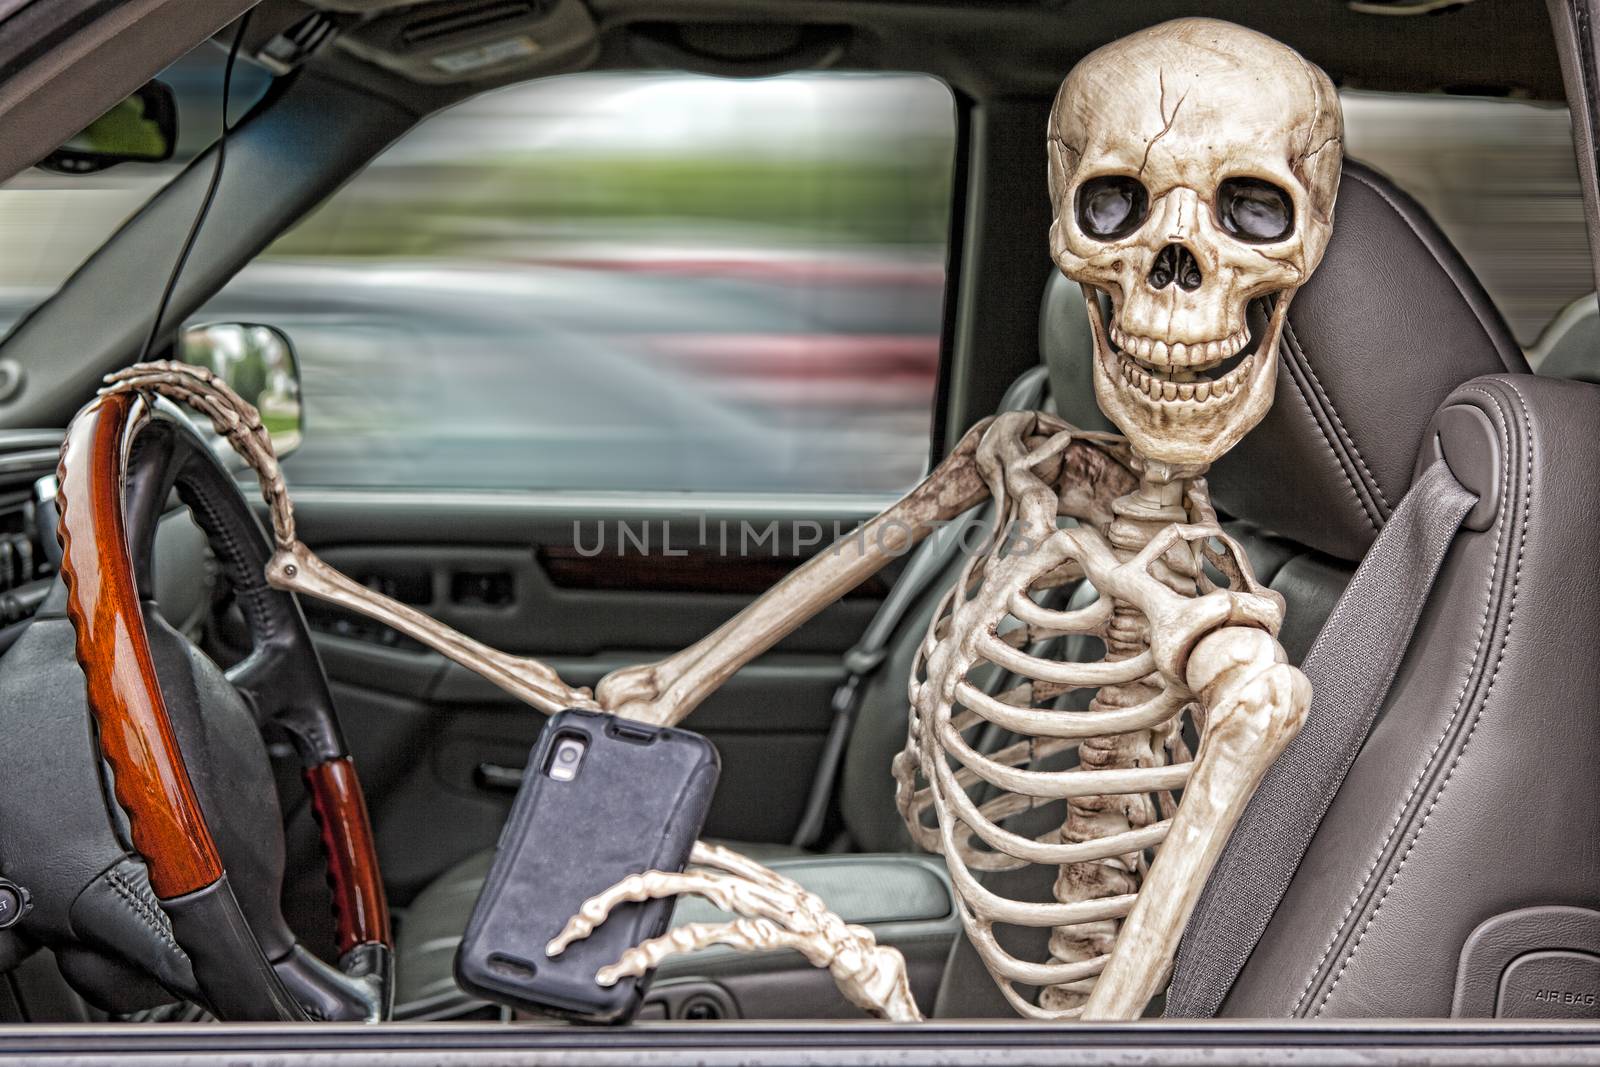 A skeleton behind the wheel of an SUV, distracted by his cell phone.  He is also not wearing a seatbelt.